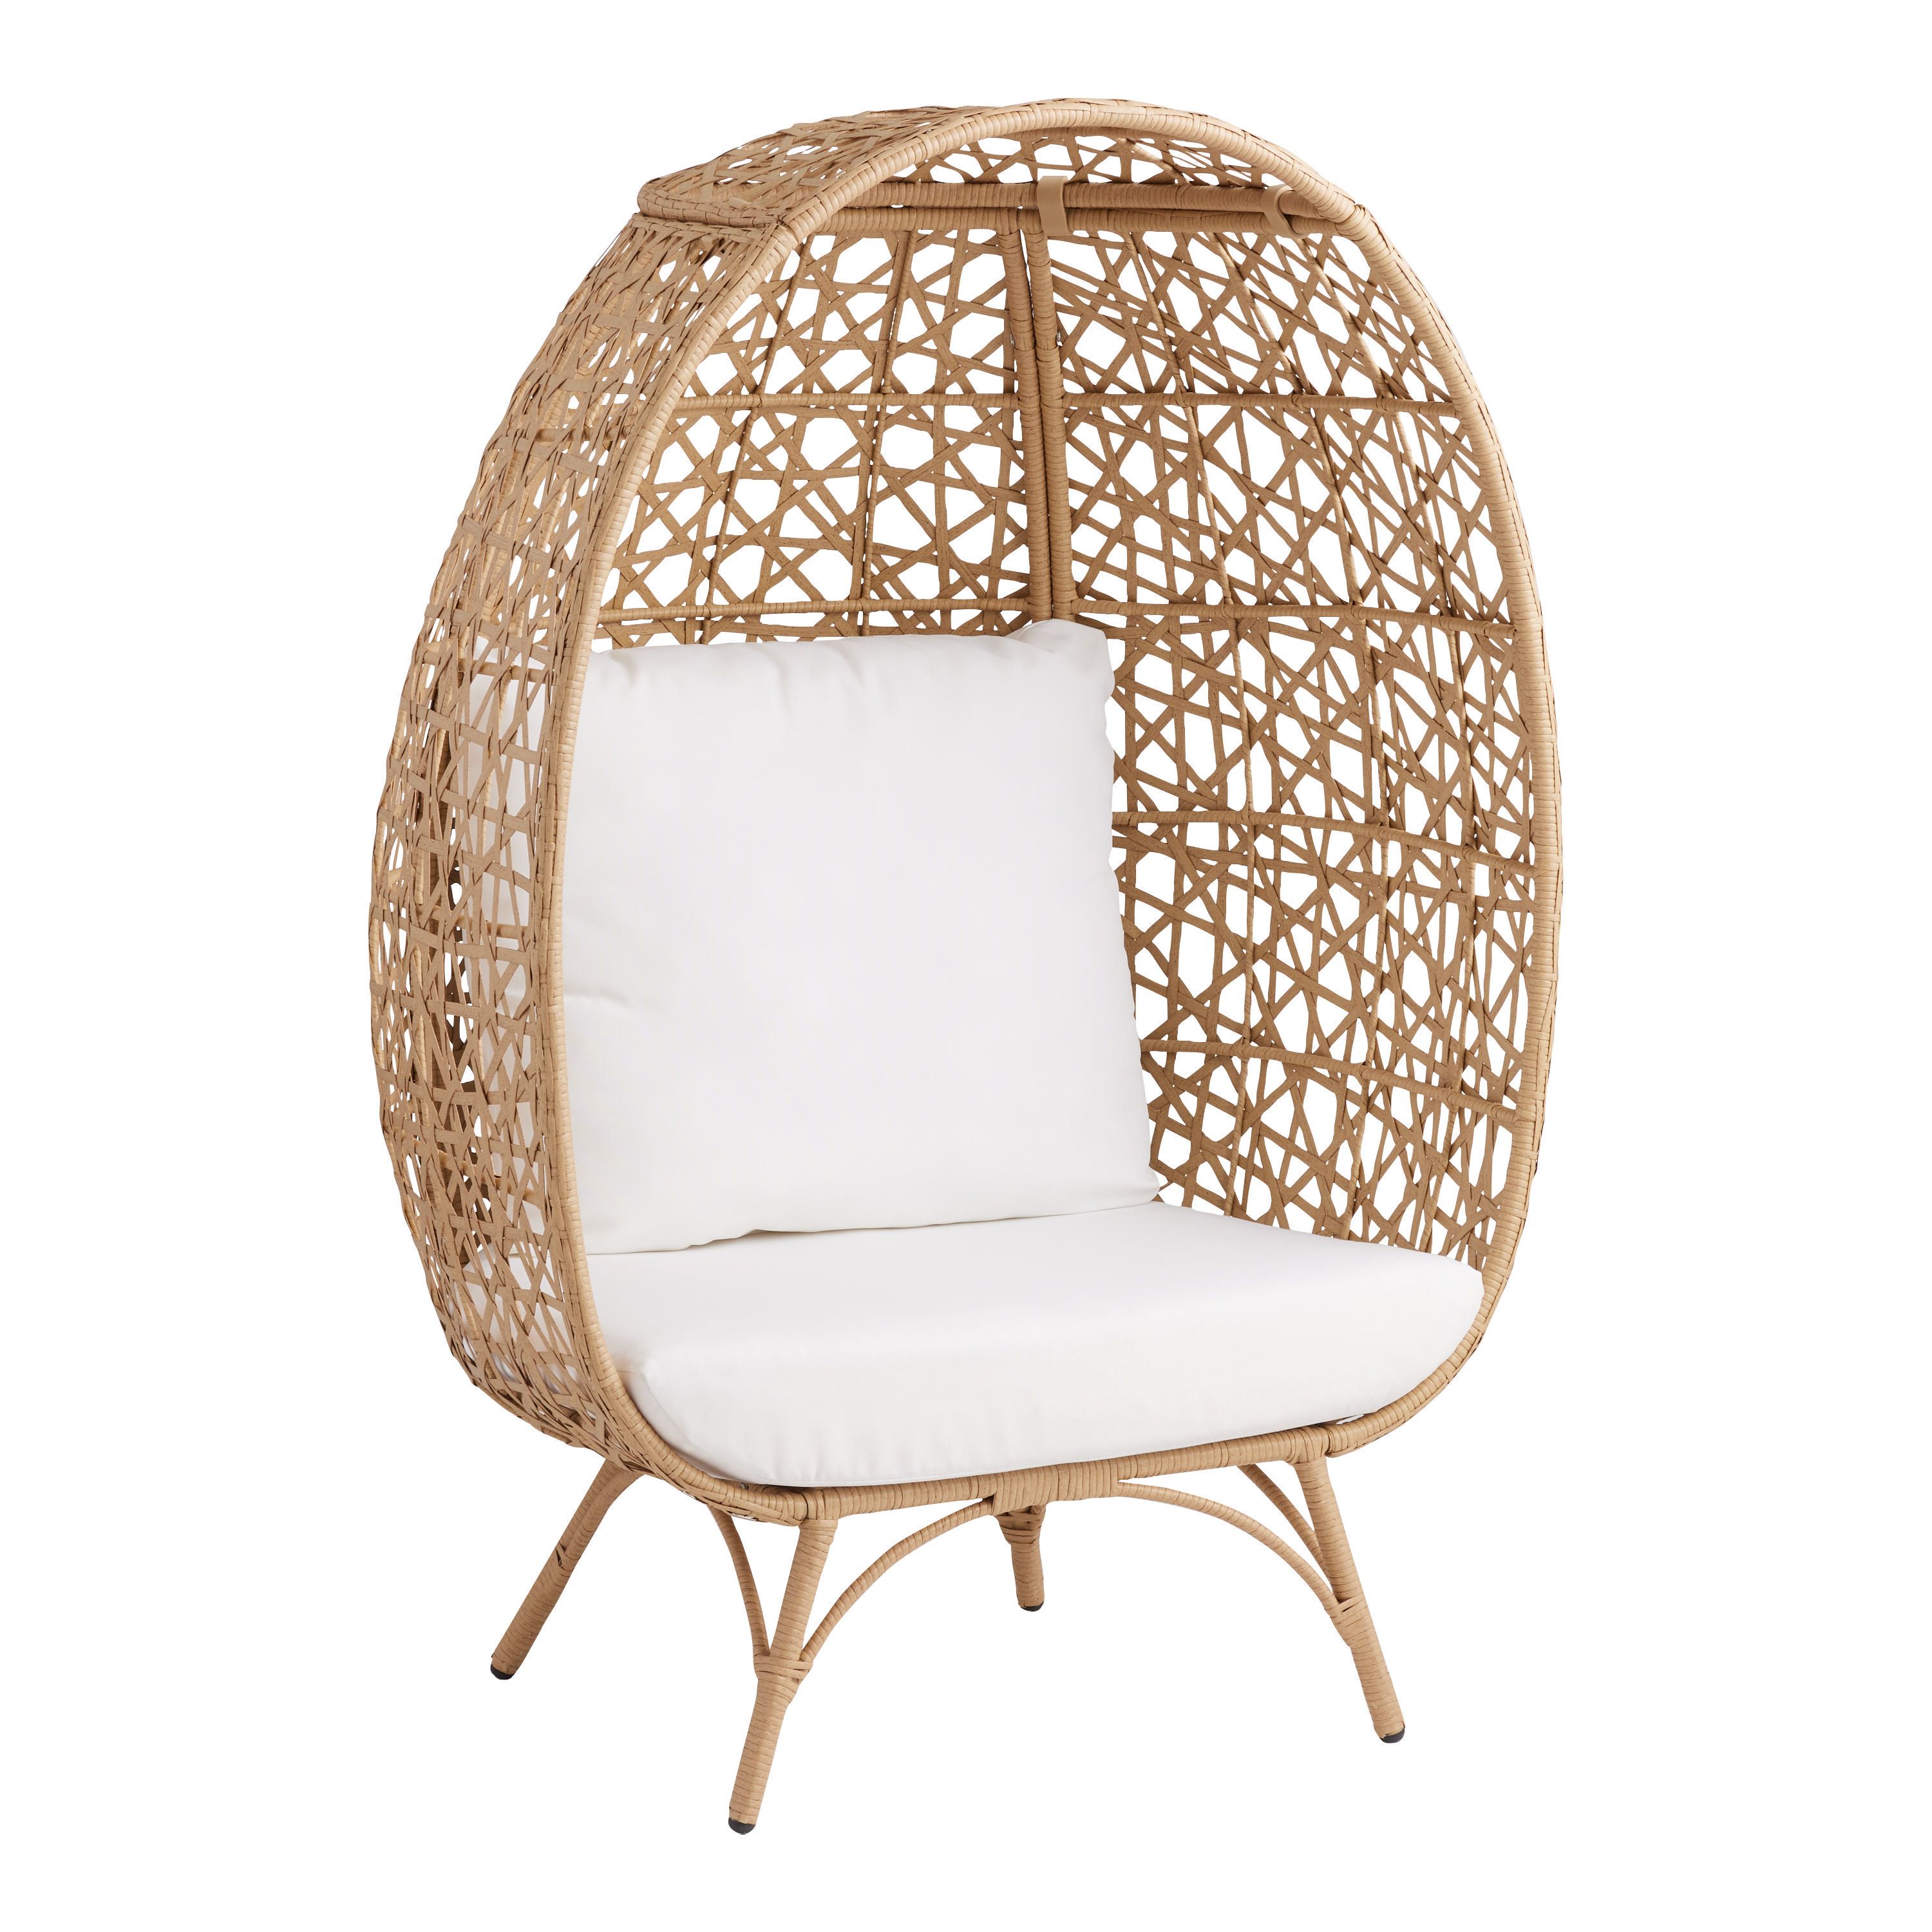 Bonaire All Weather Wicker Stationary Outdoor Egg Chair | World Market